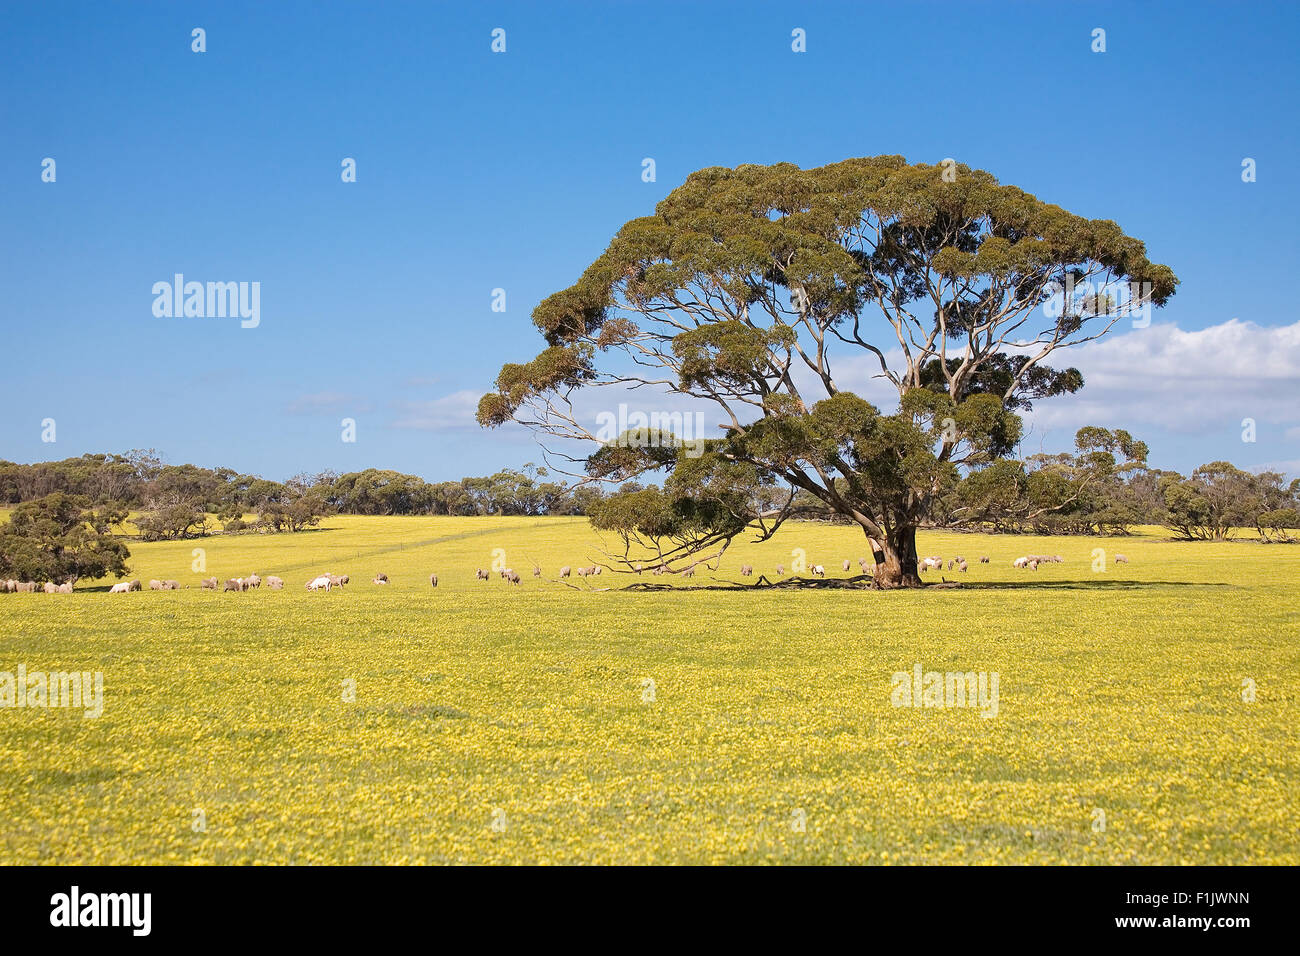 Sheeps on meadow with tree Stock Photo